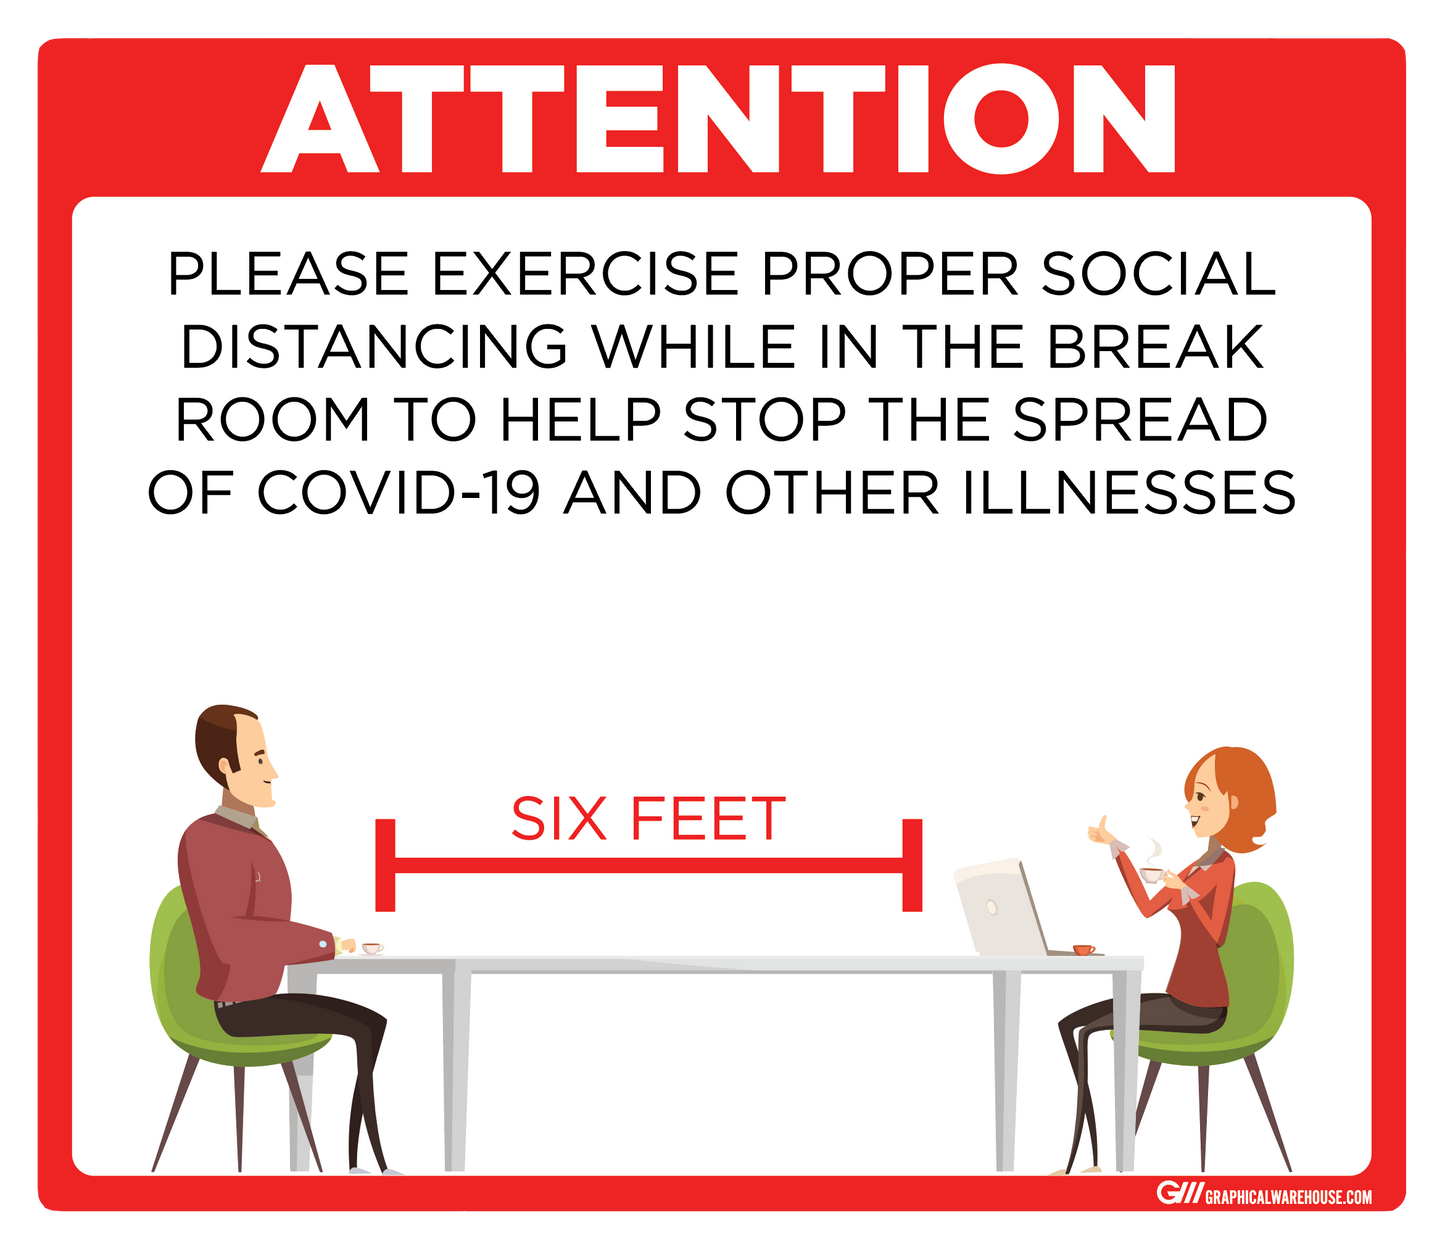 "Break Room Social Distancing" Adhesive Durable Vinyl Decal- Various Sizes/Colors Available